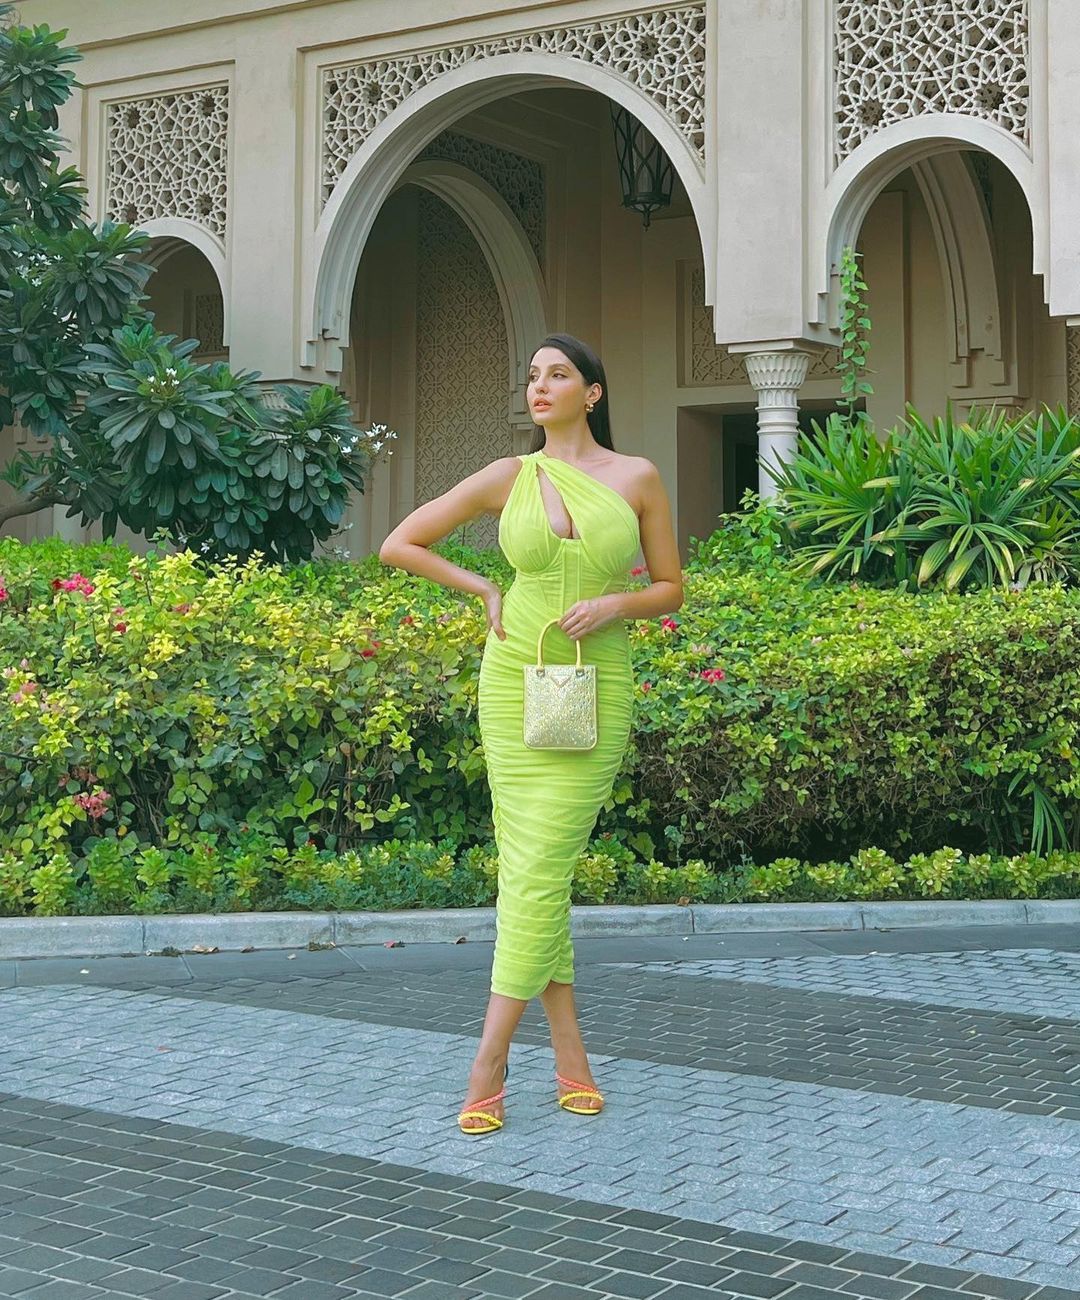 Nora Fatehi Wins Every Monochrome Look With Her Bodycon Dresses And Rs 6.7  Lakh Hermes Kelly Mini Handbag